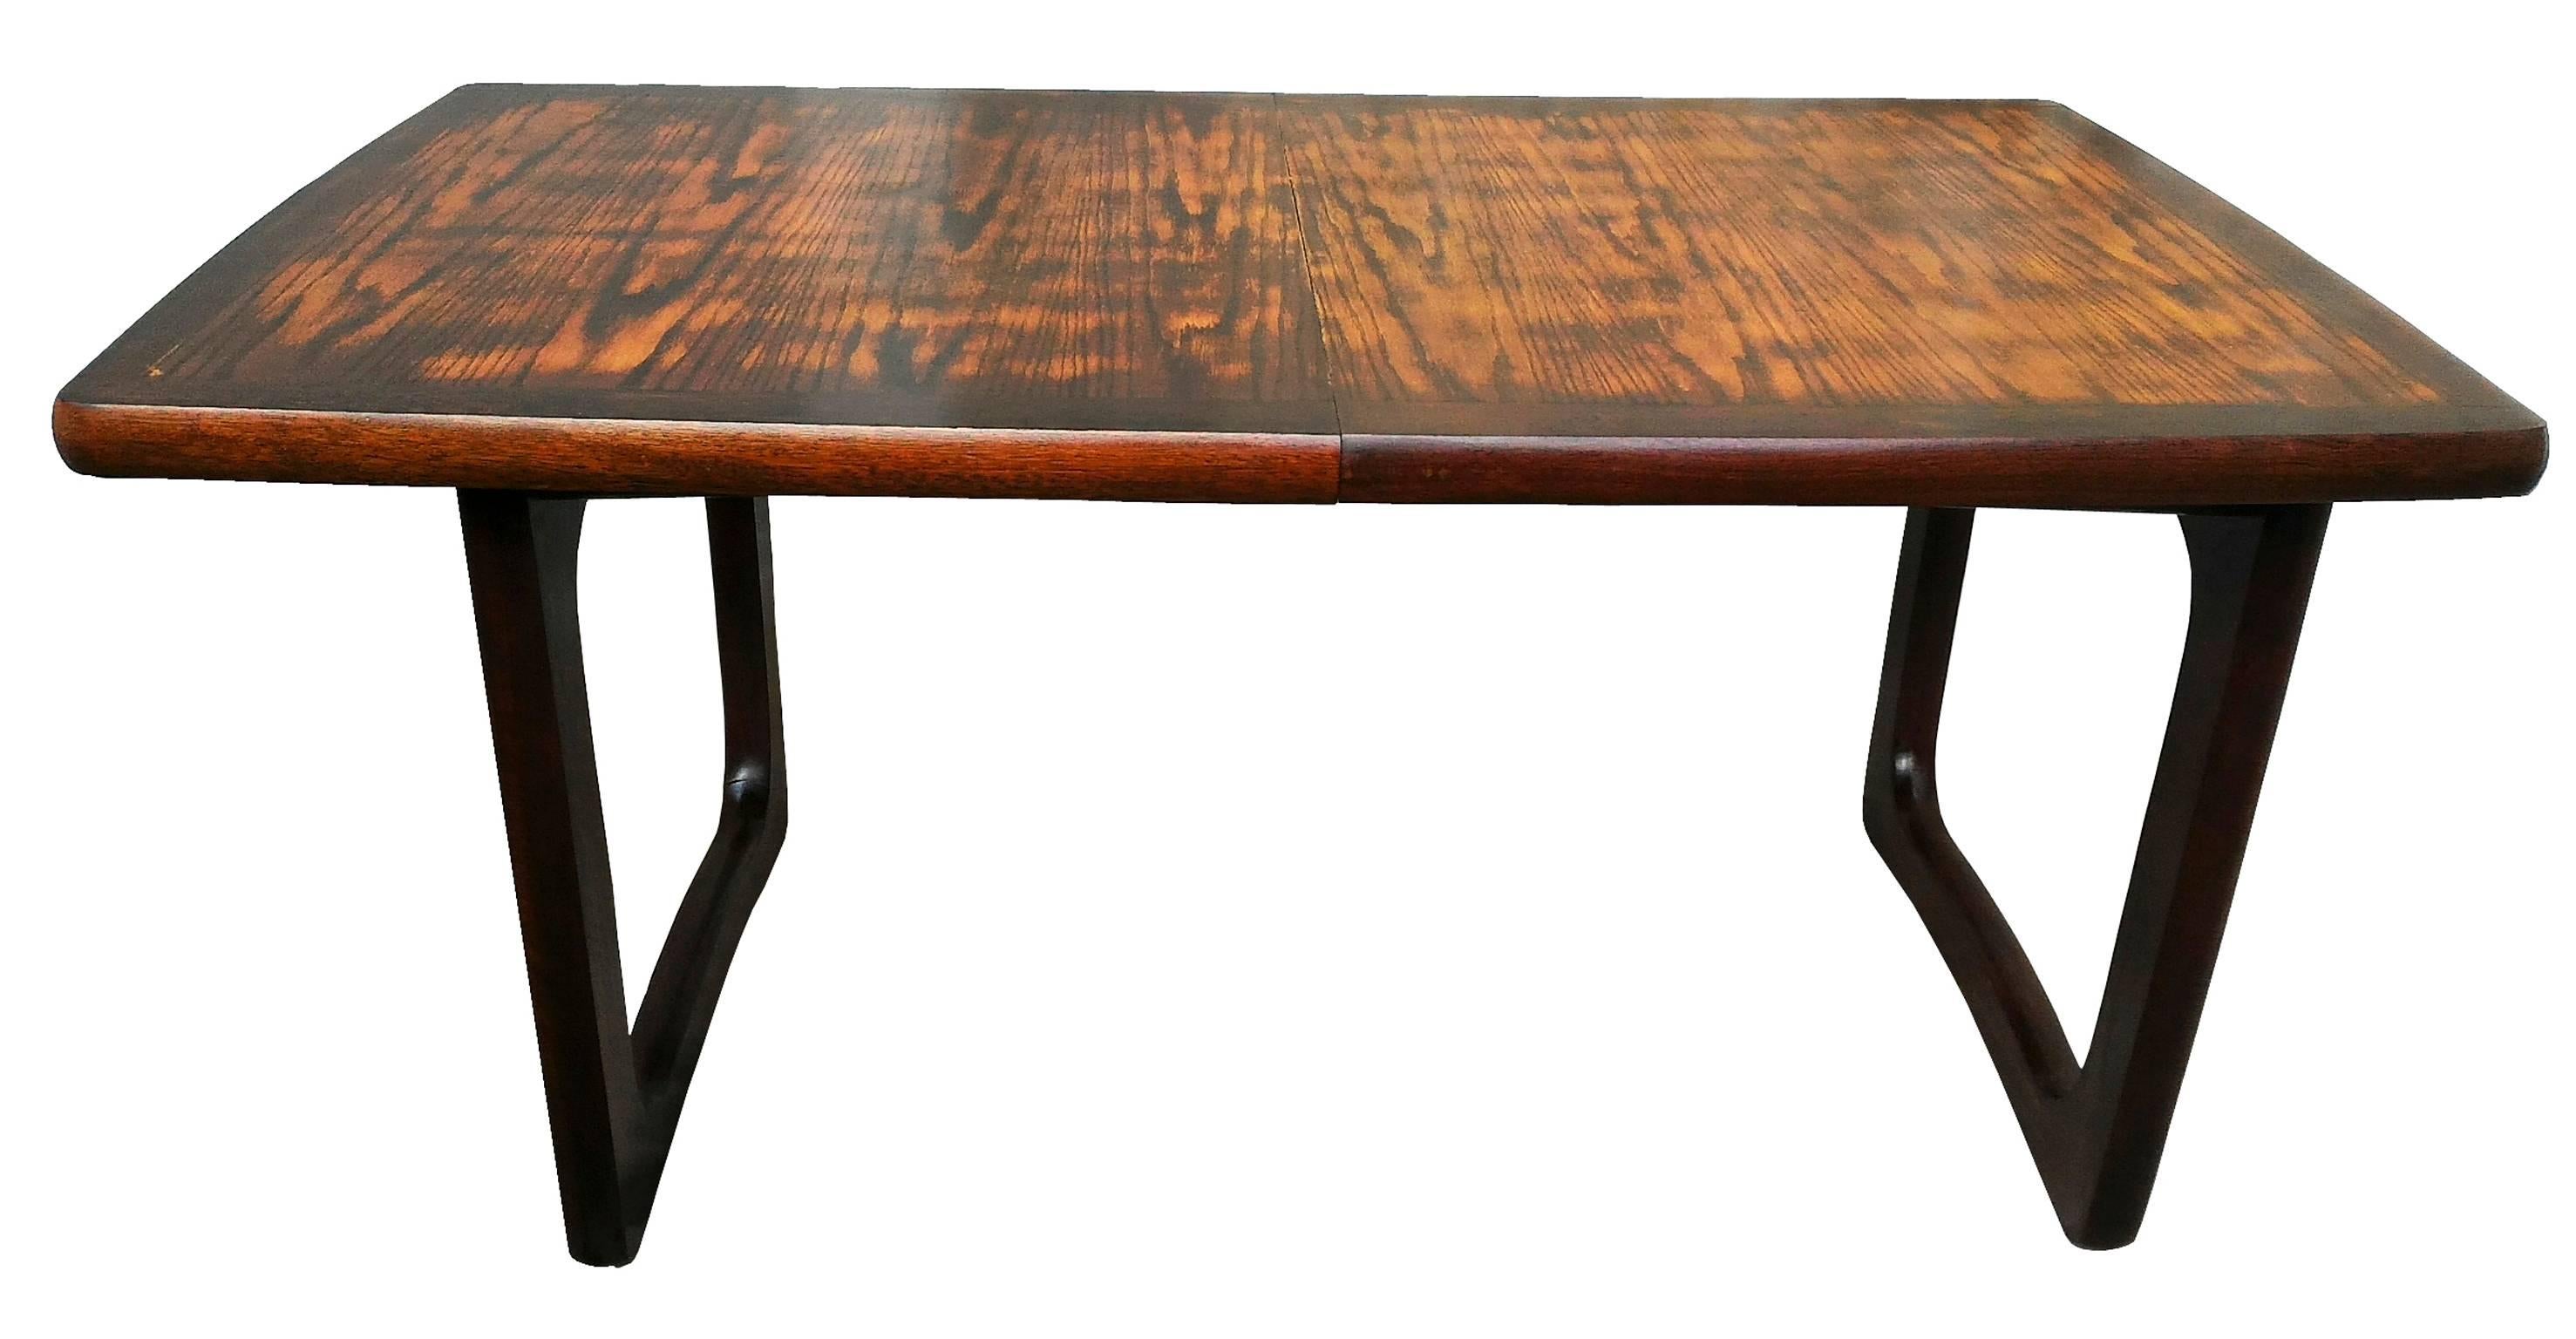 Beautiful modern large French mahogany Mid-Century Modern extendable dining or conference table, solid, excellent quality, superb wood color, great dramatic curved line design on the table feet.
In a very good condition.

Dimensions: 

Width